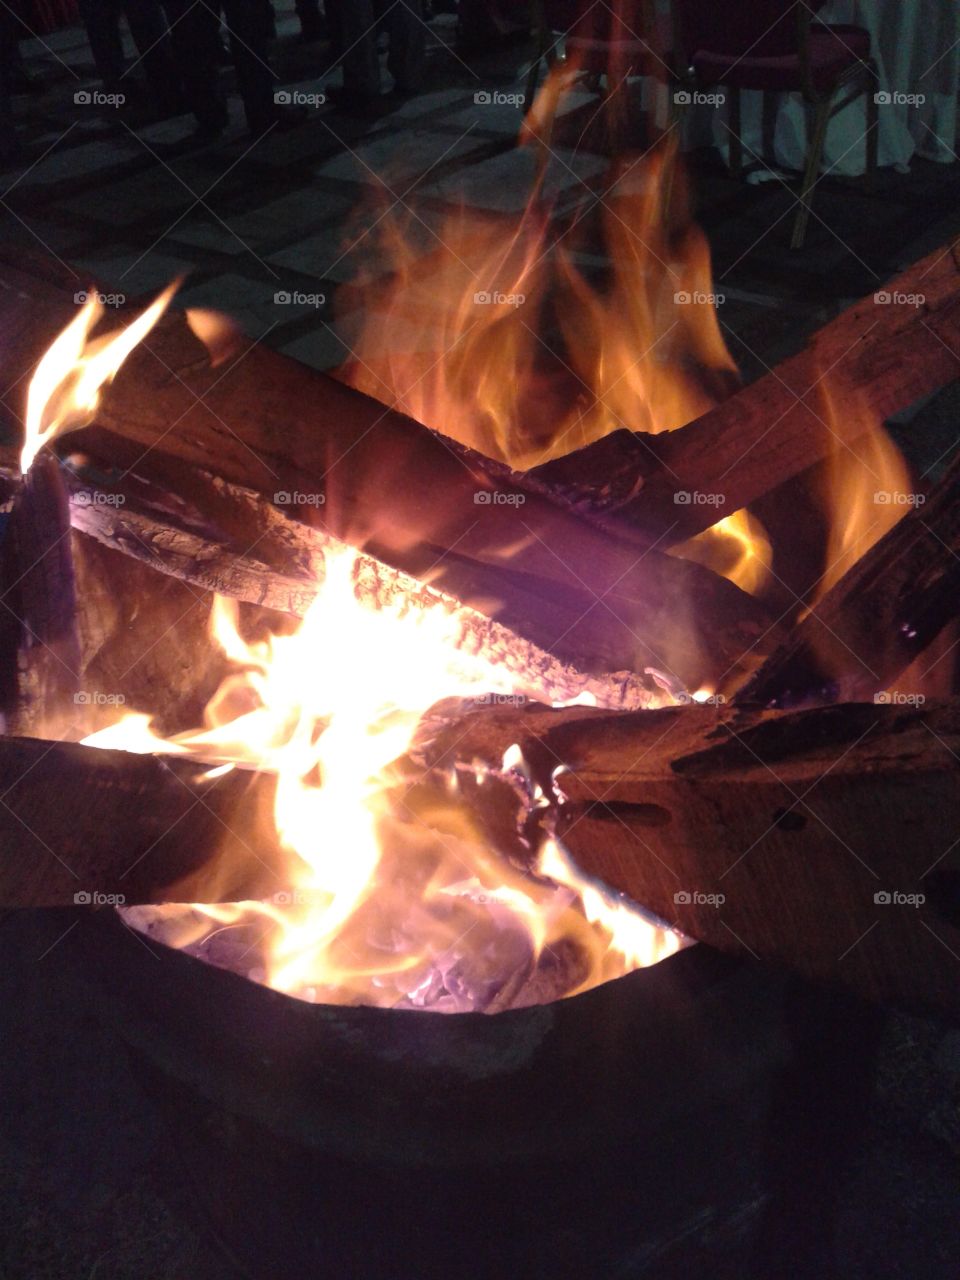 Burn in fire.
wood...........distraction.